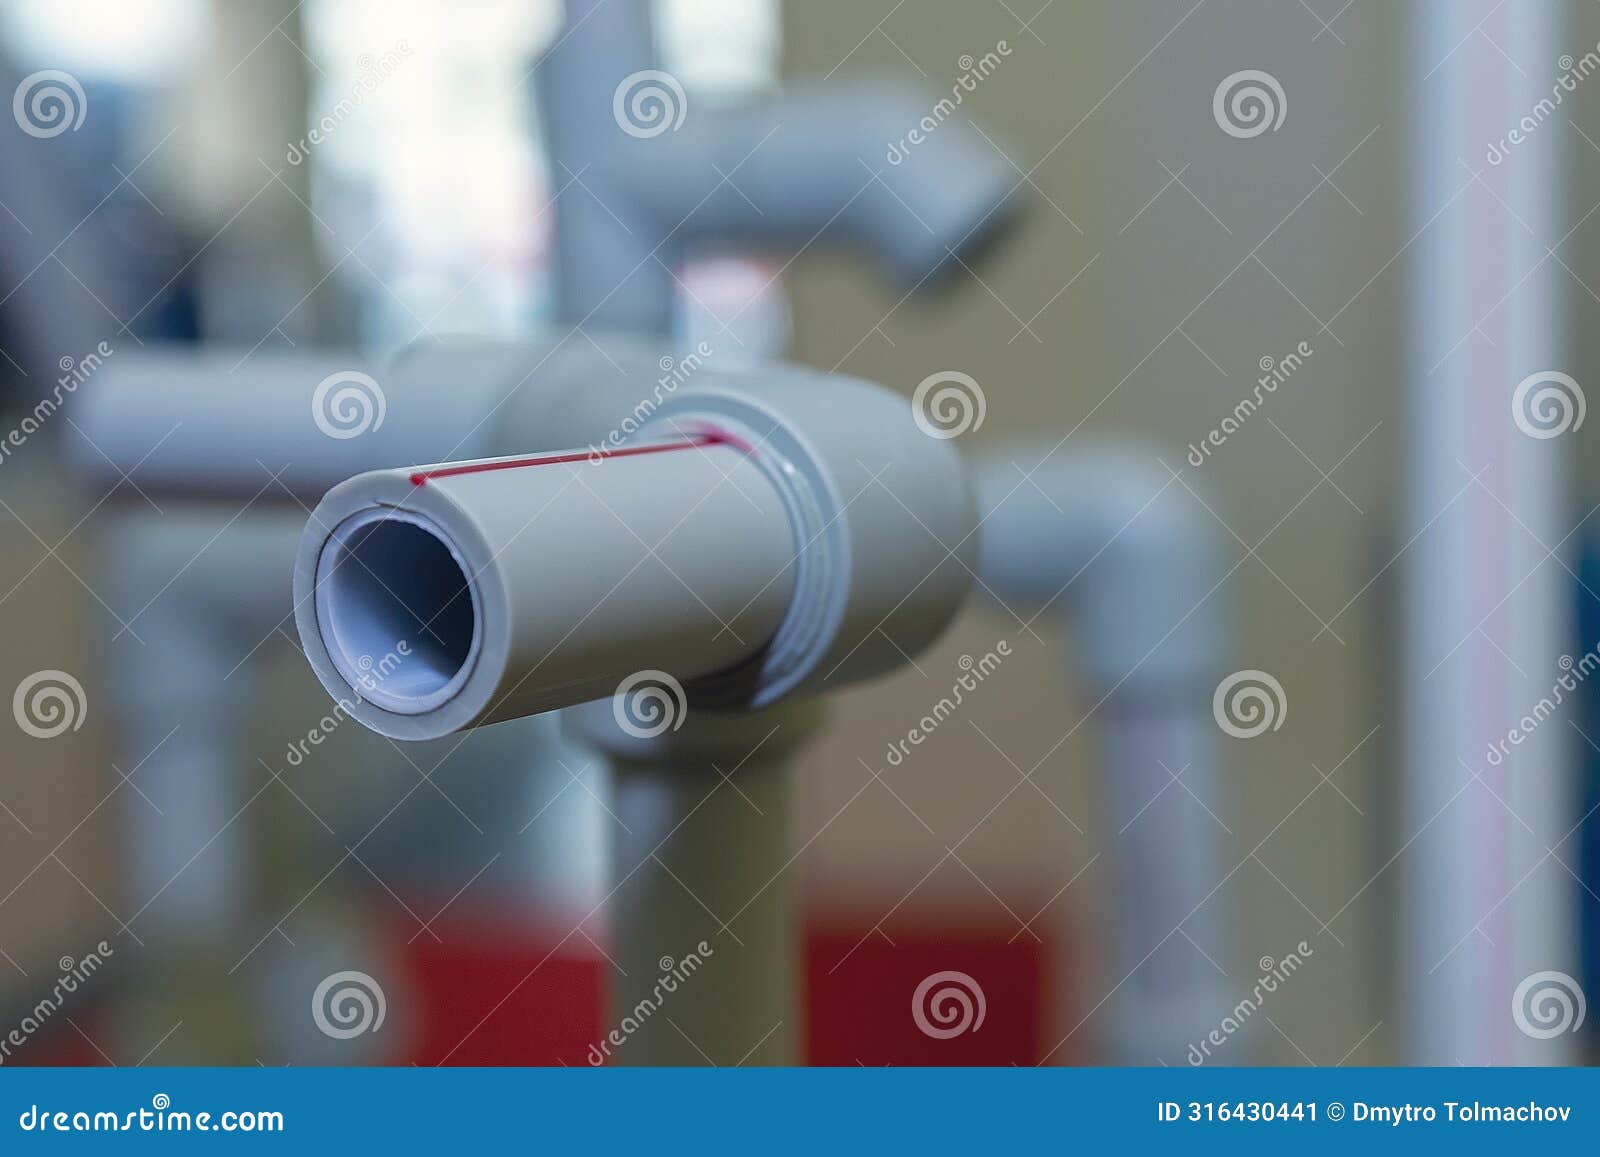 polypropylene conductor pipe in section close-up